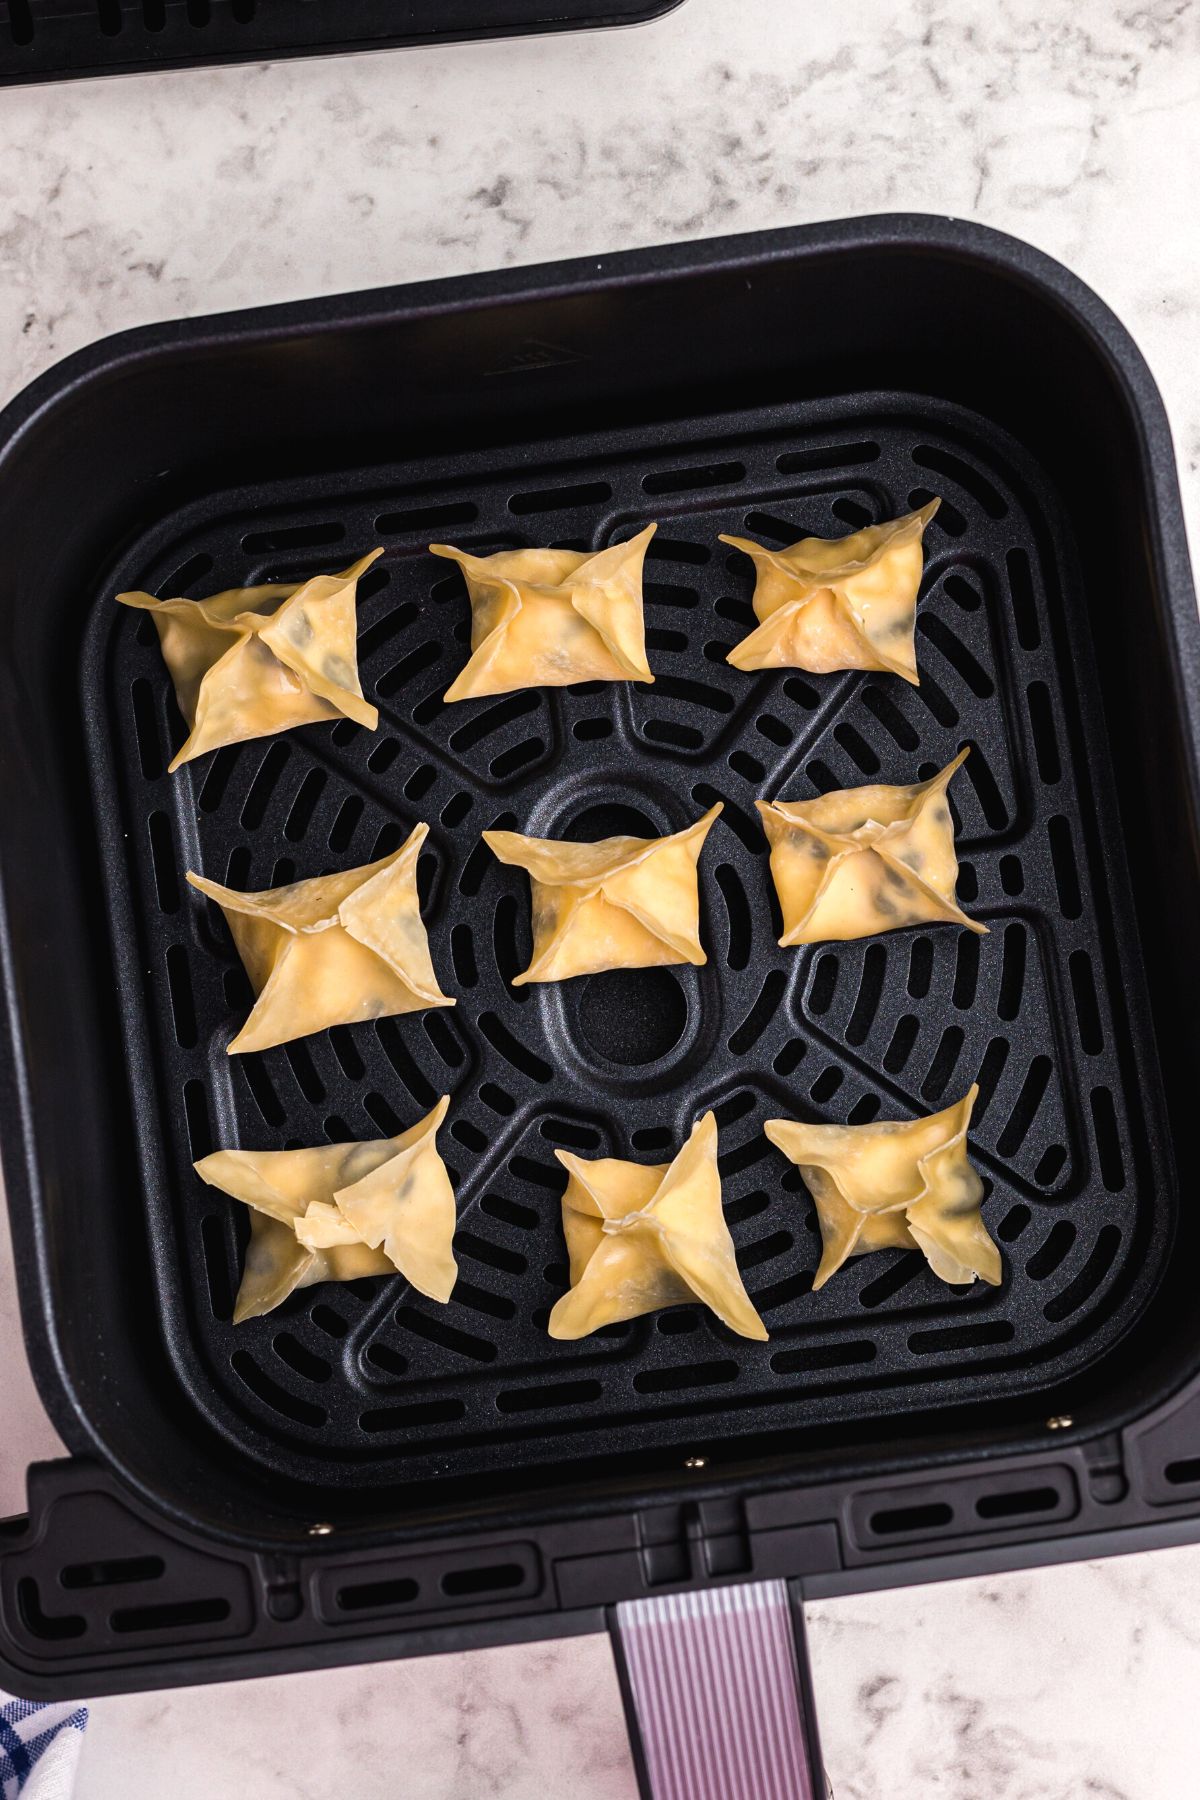 Wontons in the air fryer basket before being cooked